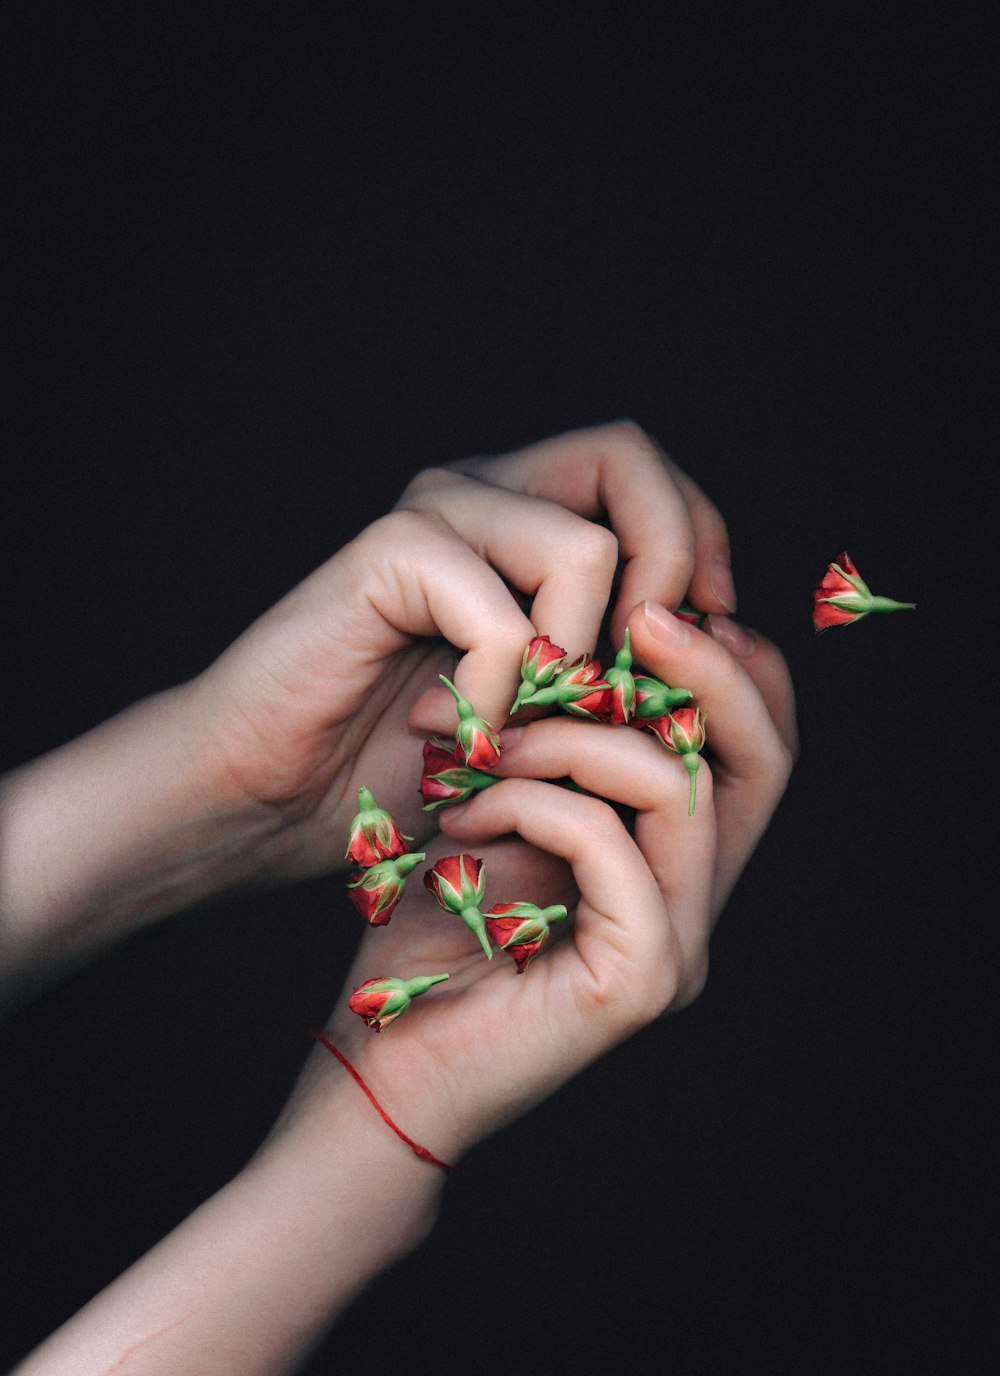 person holding red rose flowers